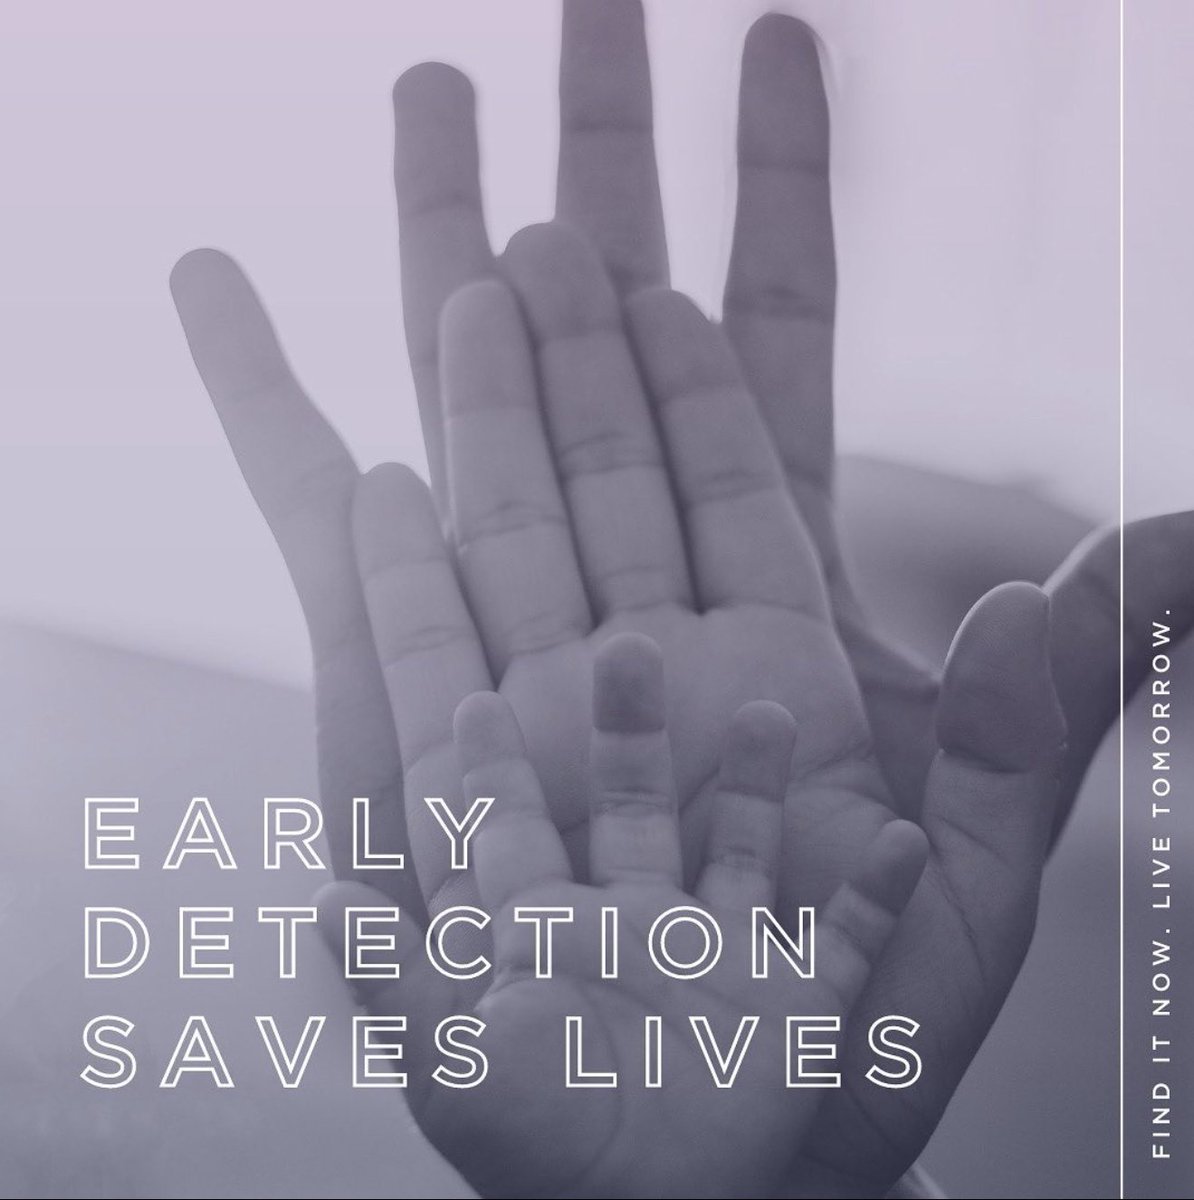 🧬 Pancreatic cancer early detection poses unique challenges. For one, there is no universal or reliable screening test - making it one of the most difficult cancers to detect early enough to treat.

💜 Join our mission and learn more at trovanow.com
#trovanow #precede